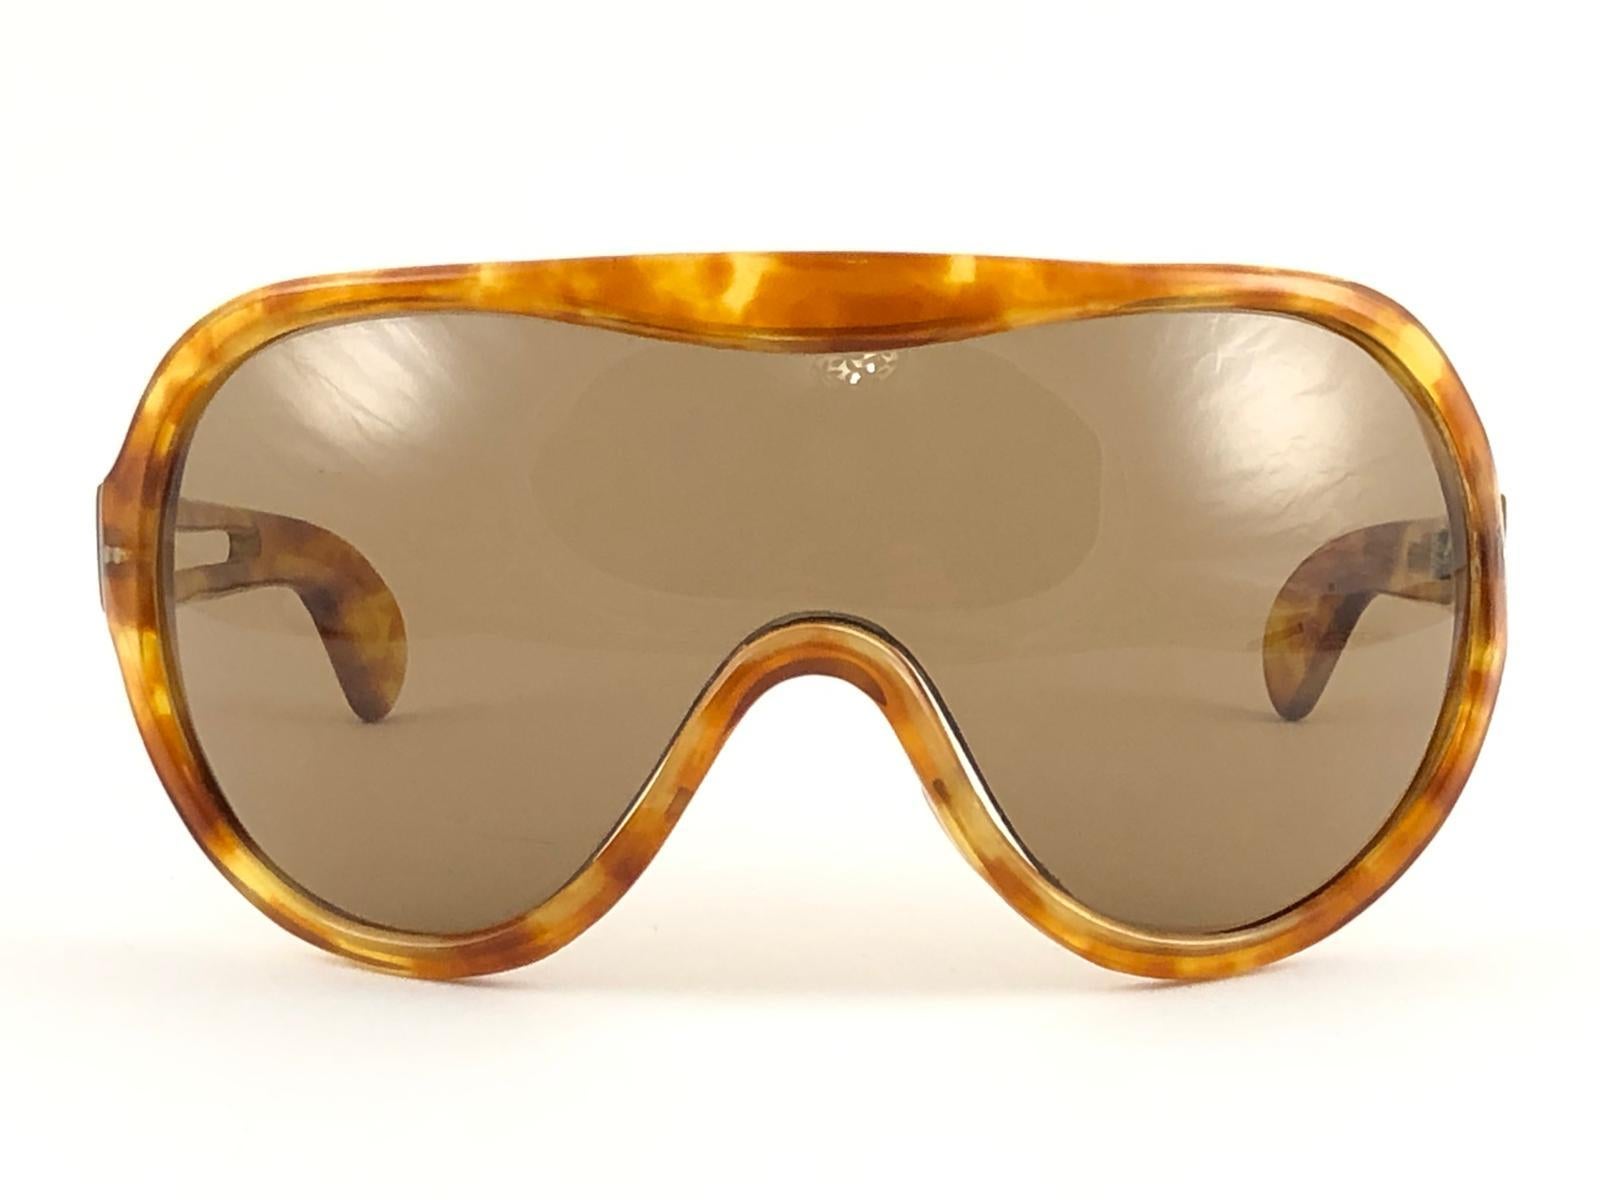 New rare collector's item vintage Philippe Chevalier light tortoise oversized sunglasses with spotless medium brown mono lens. From the same series as the ones worn by Miles Davis.
A superb find. 

Please notice this item may show minor sign of wear